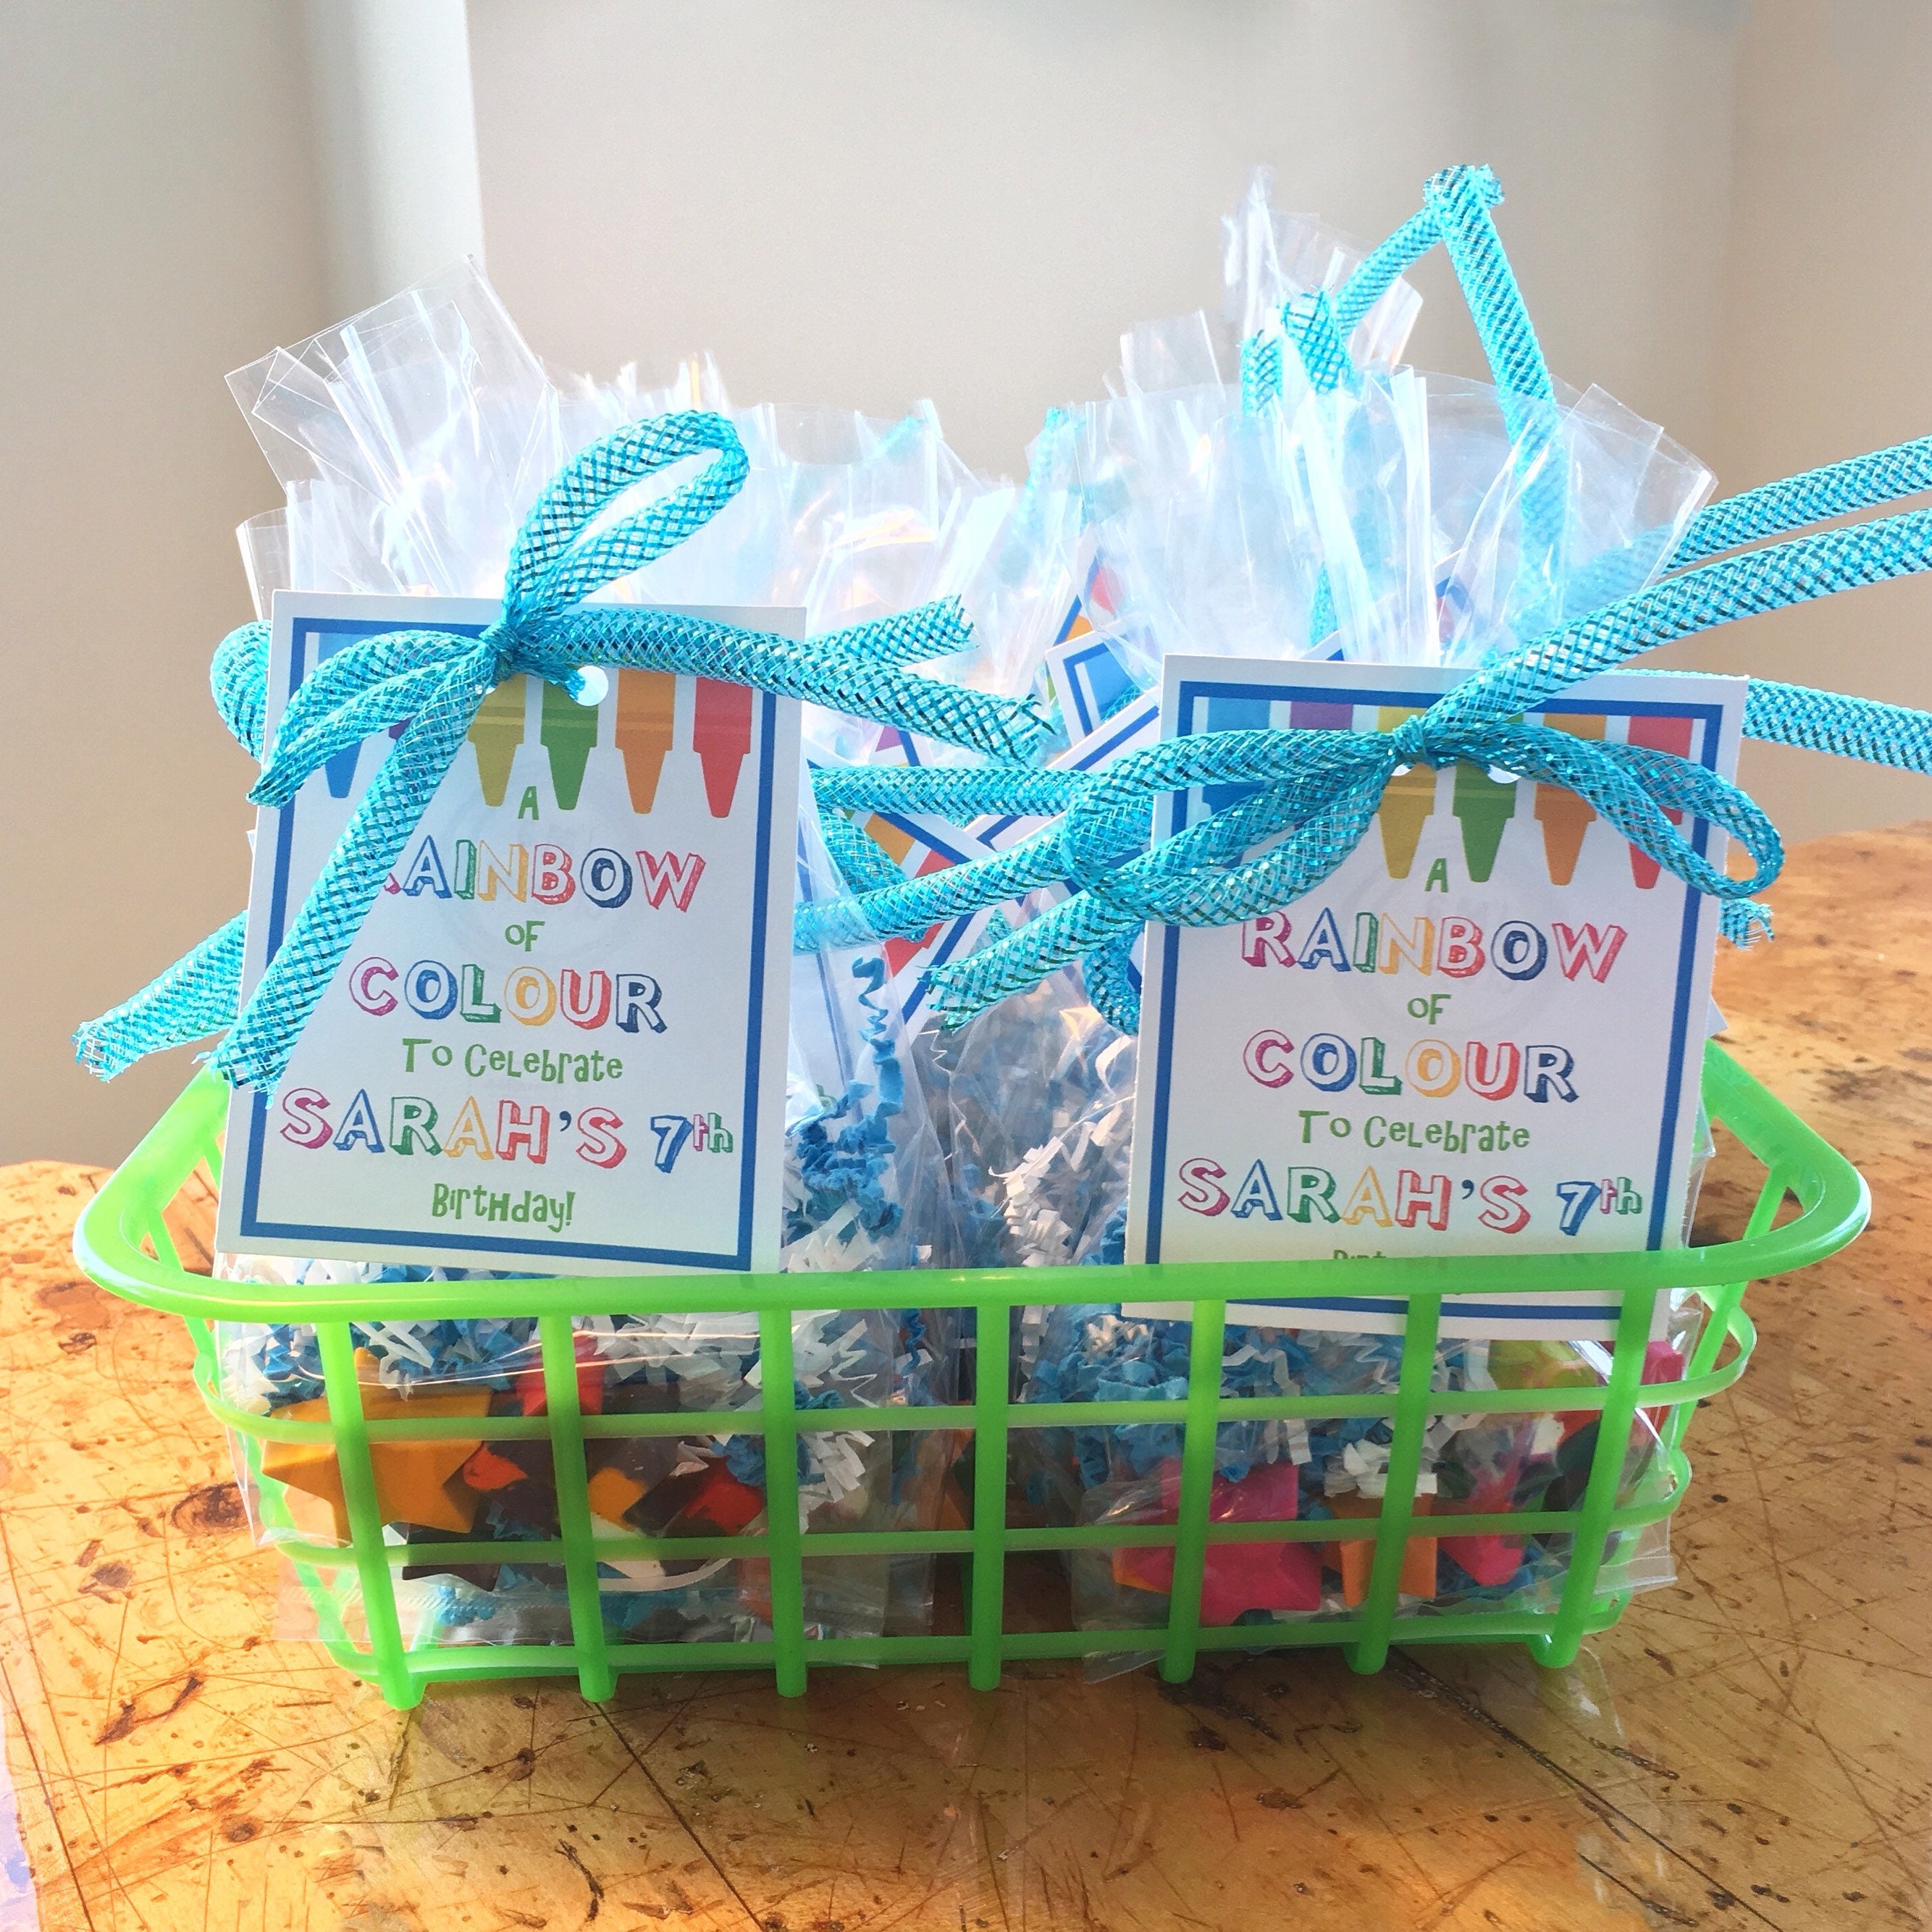 Letter & Star Crayon Party Favours - includes 1 letter crayon and